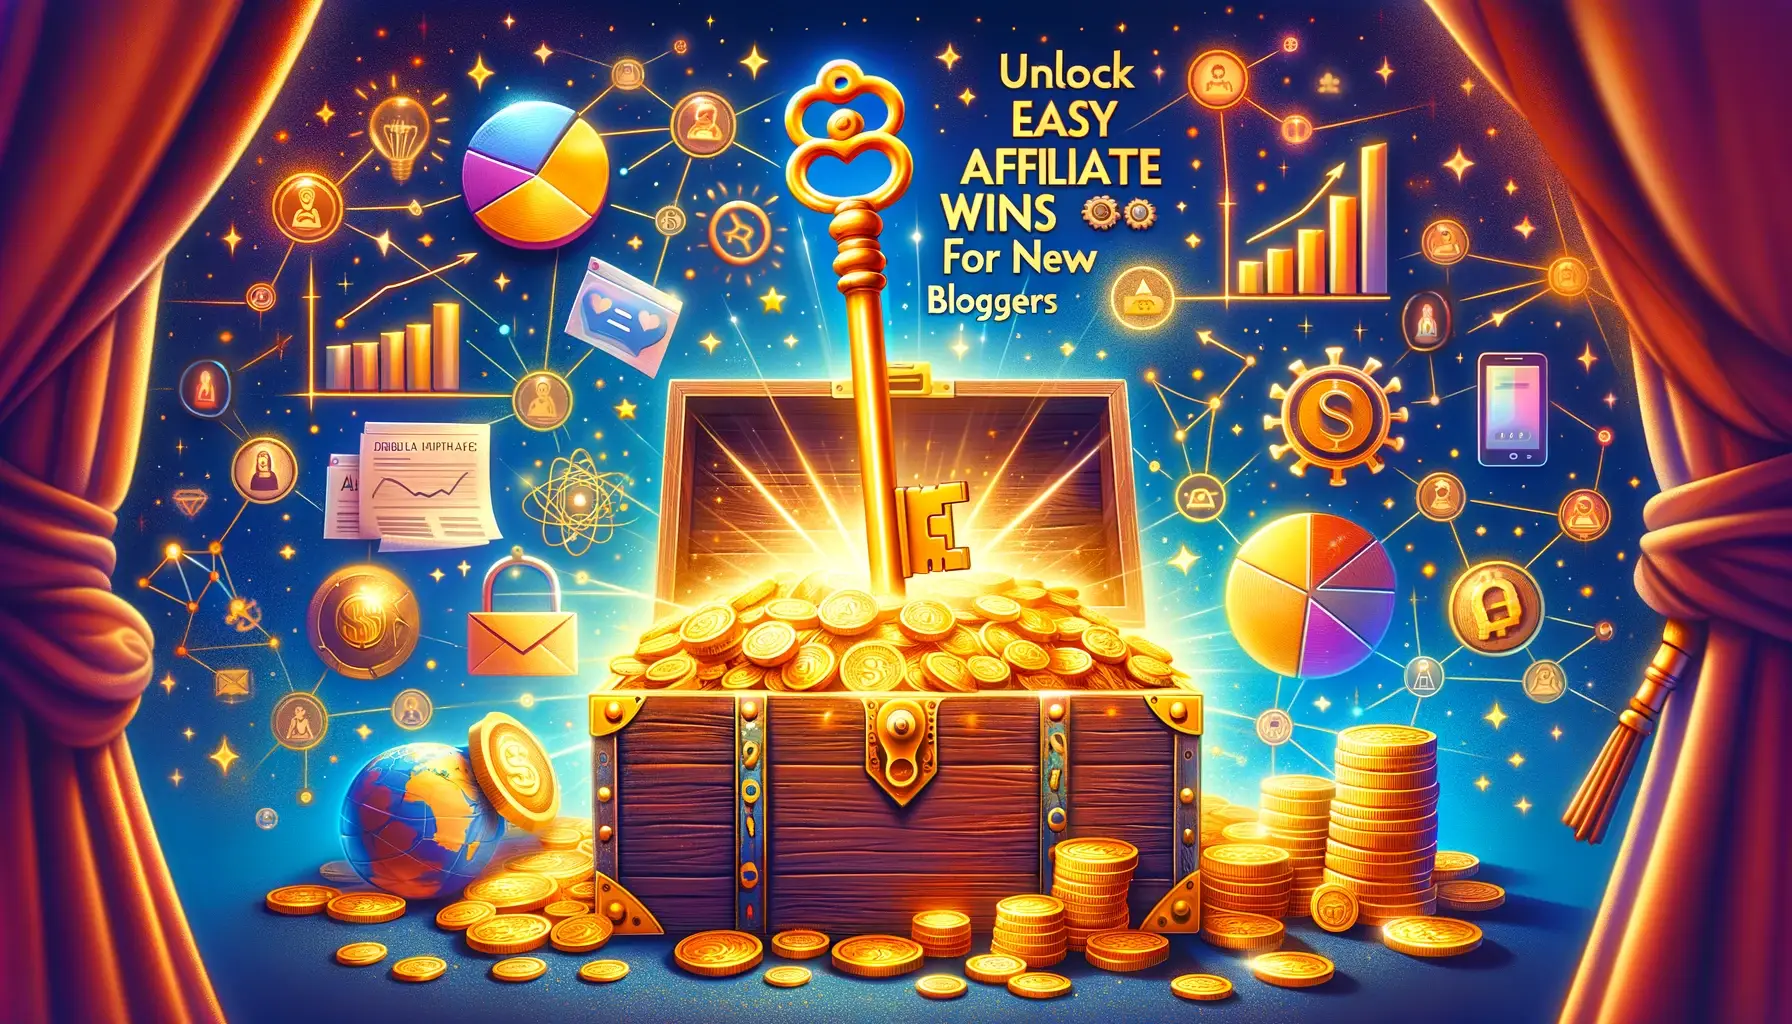 Read more about the article Unlock Easy Affiliate Wins for New Bloggers